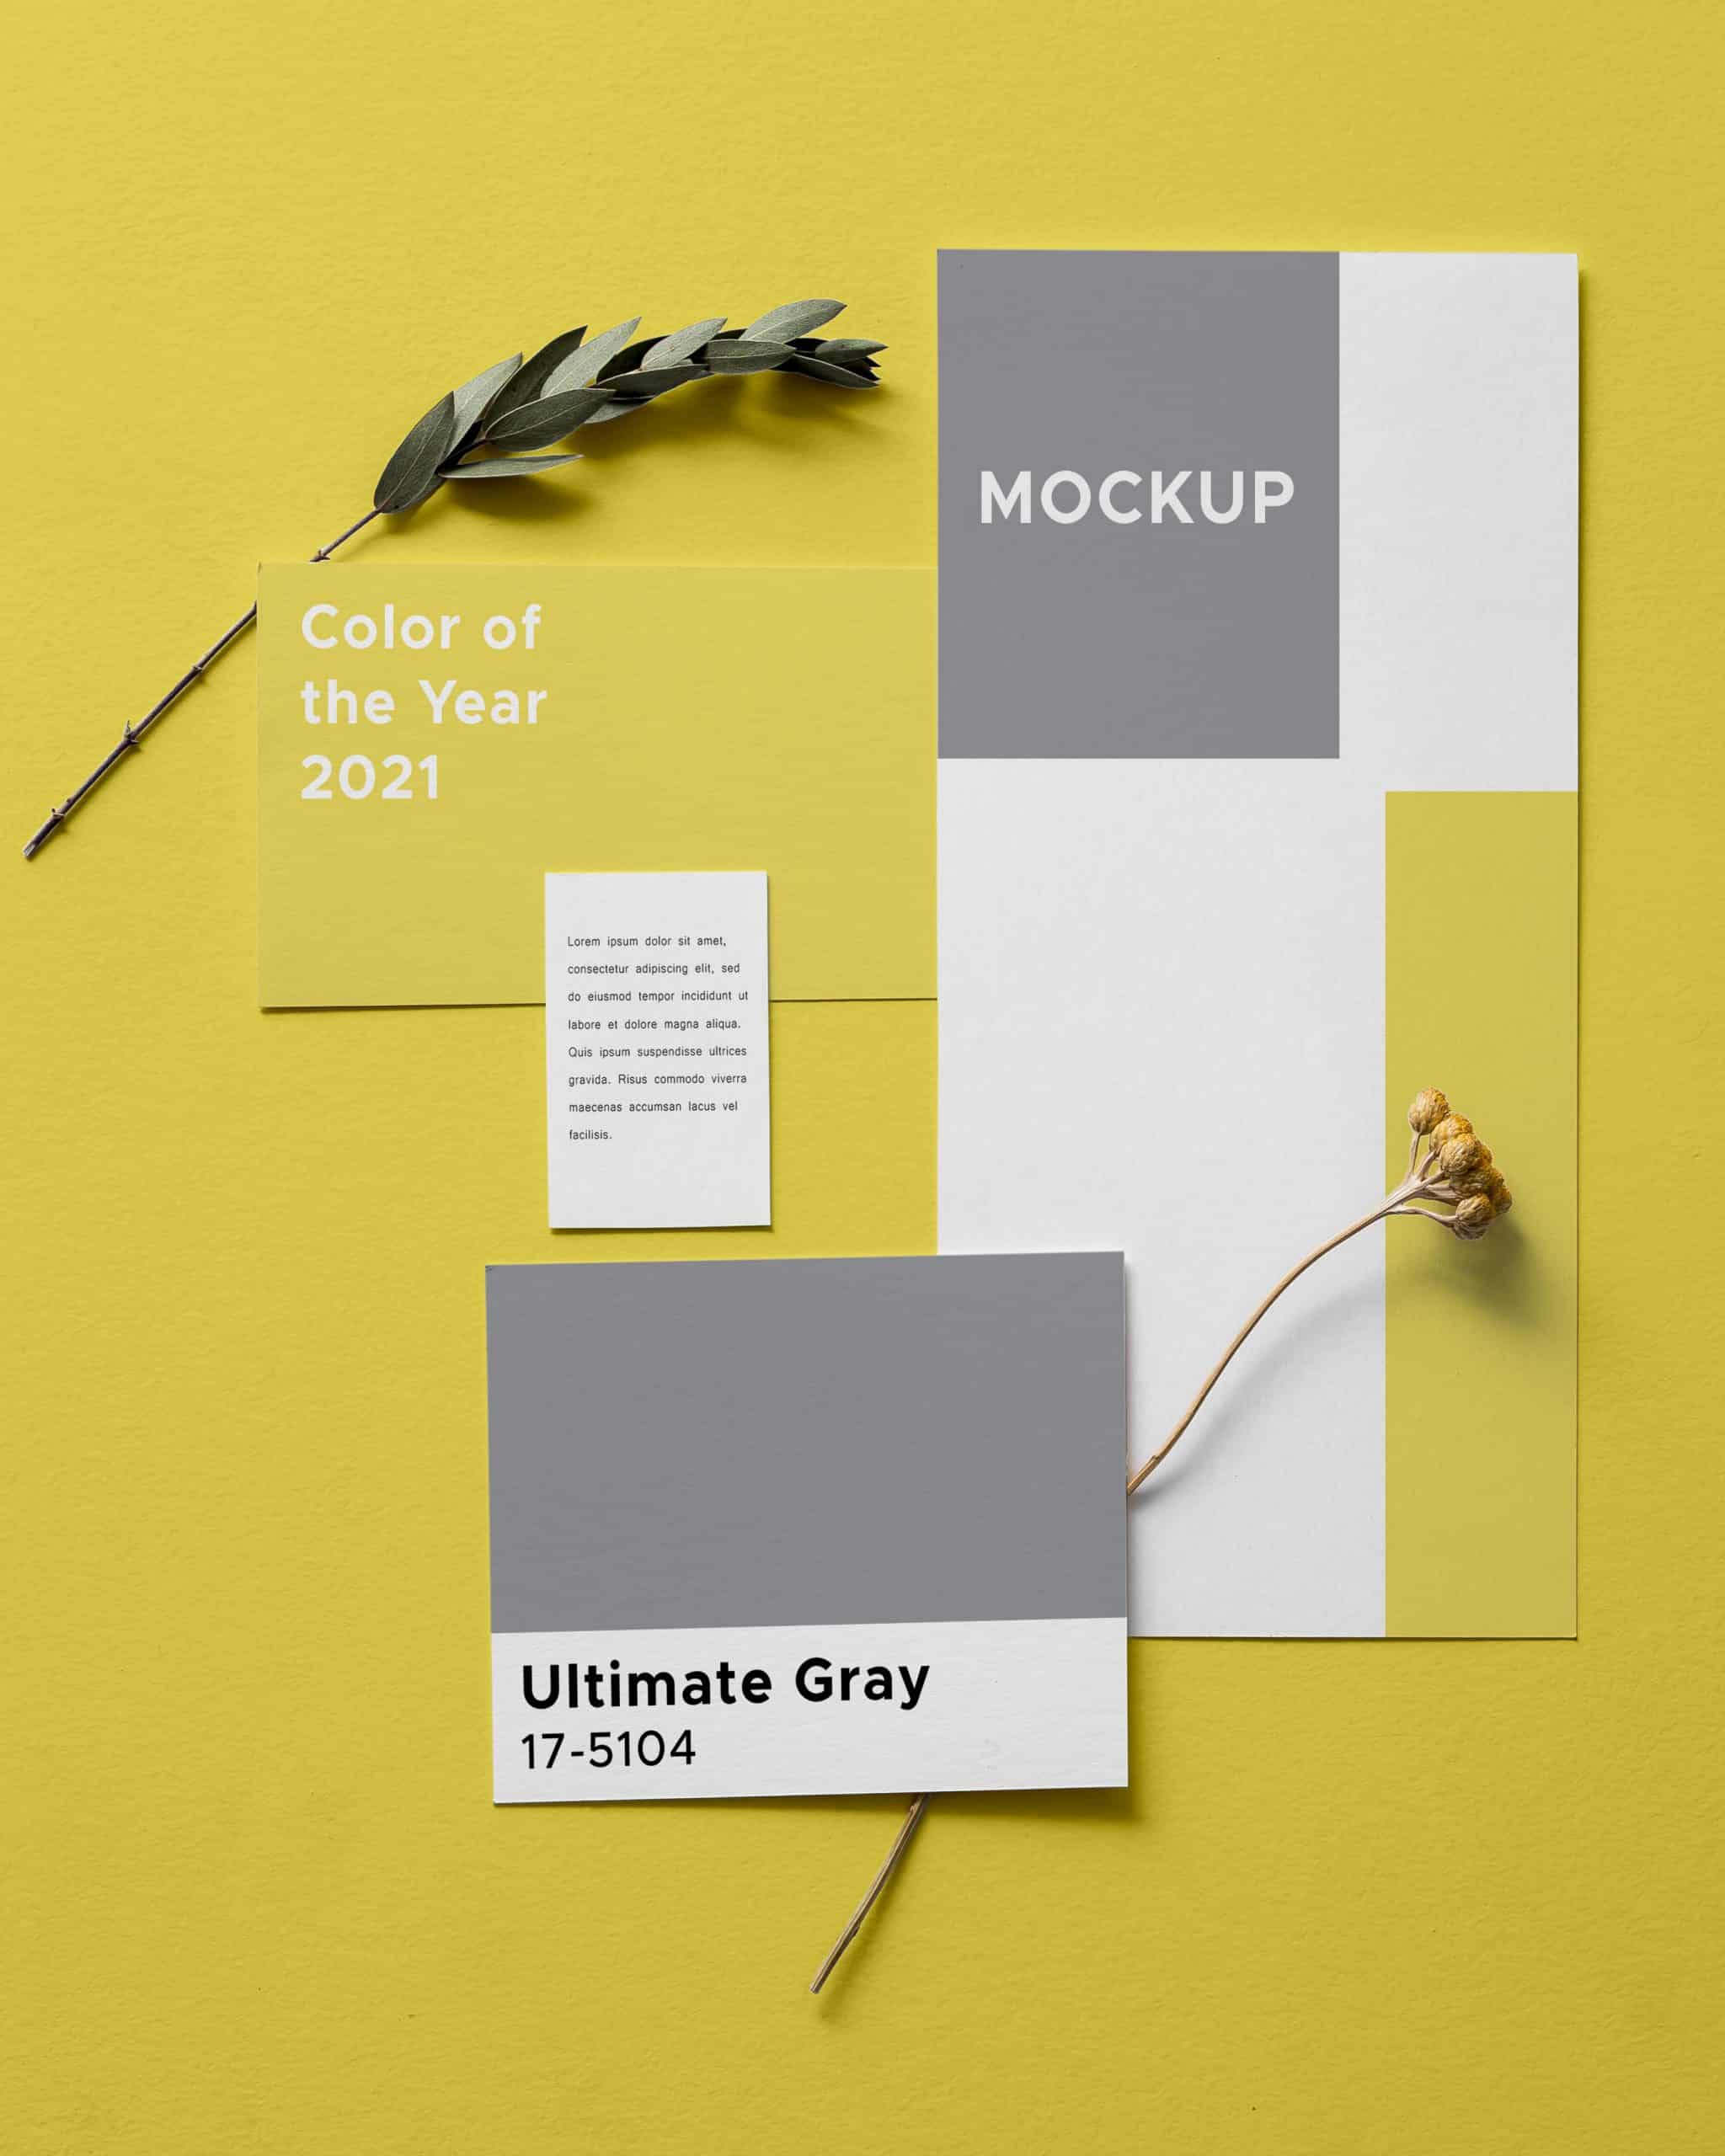 How Pantone 2021 Colors Of The Year Will Impact Creatives - GoVisually